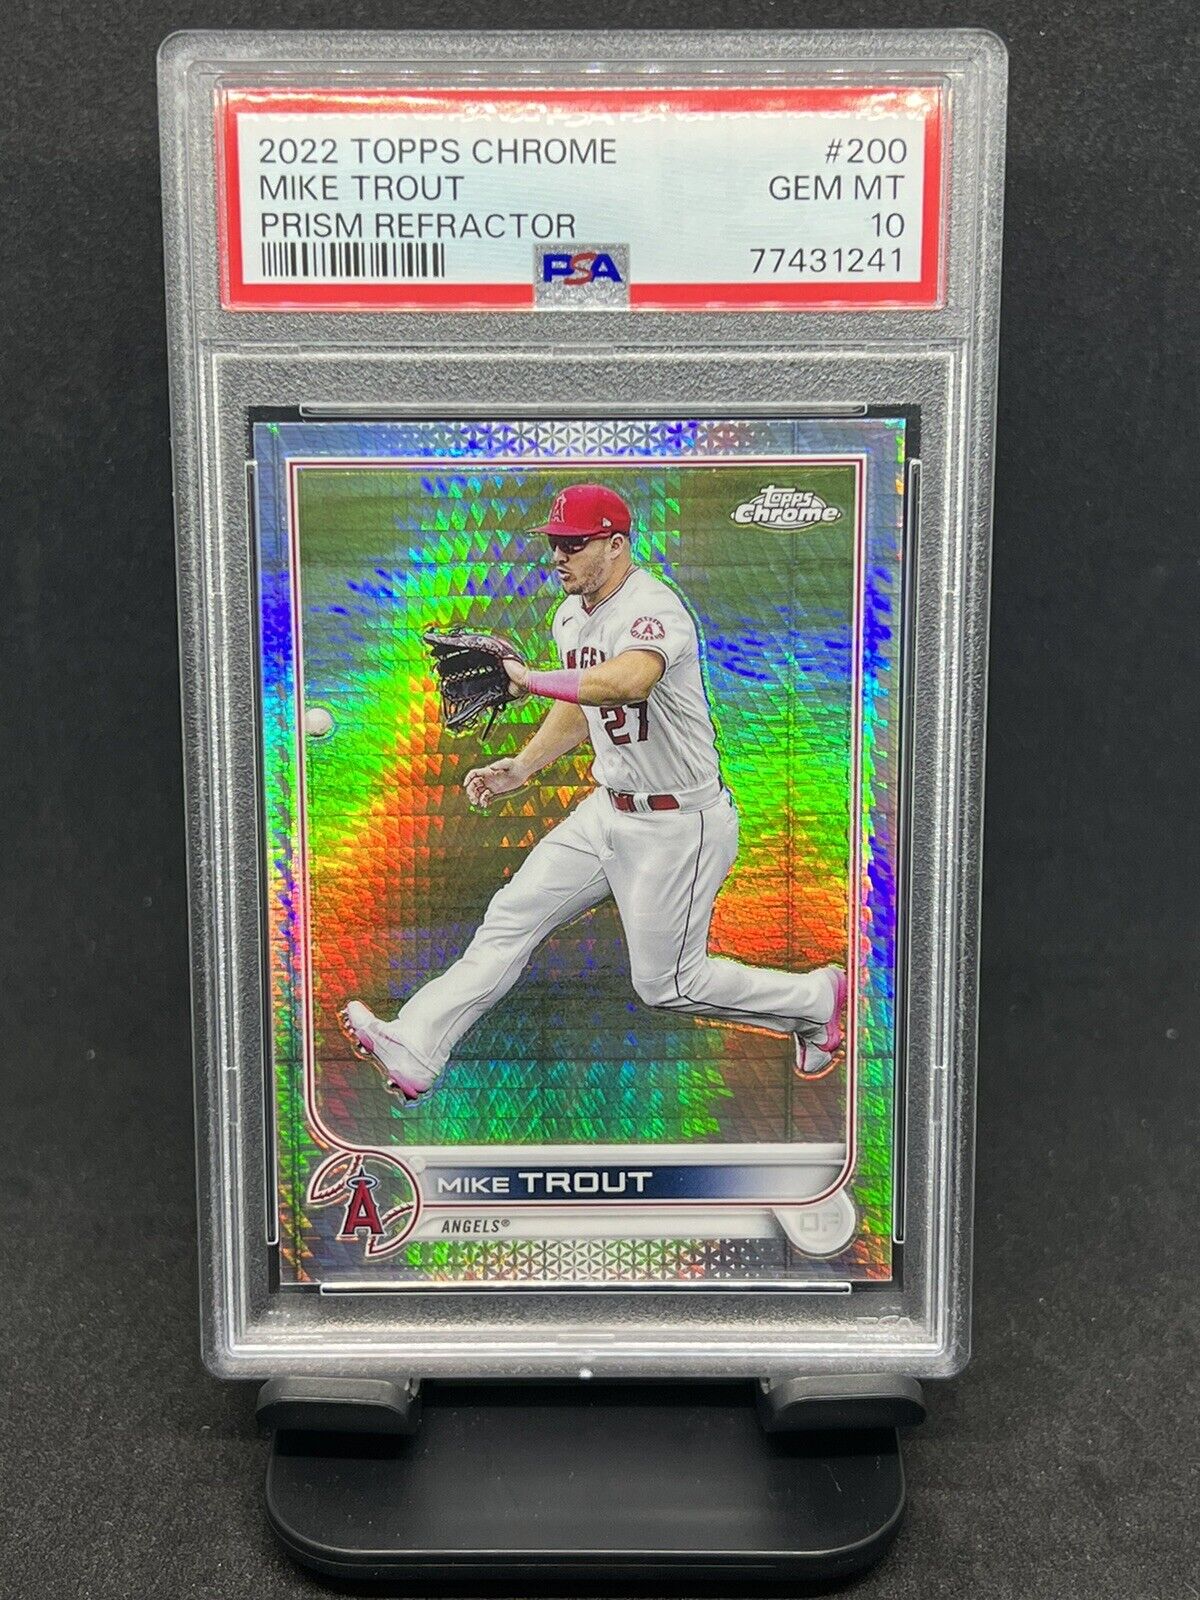 2022 Topps Chrome Baseball MIKE TROUT Prism Refractor #200 PSA 10